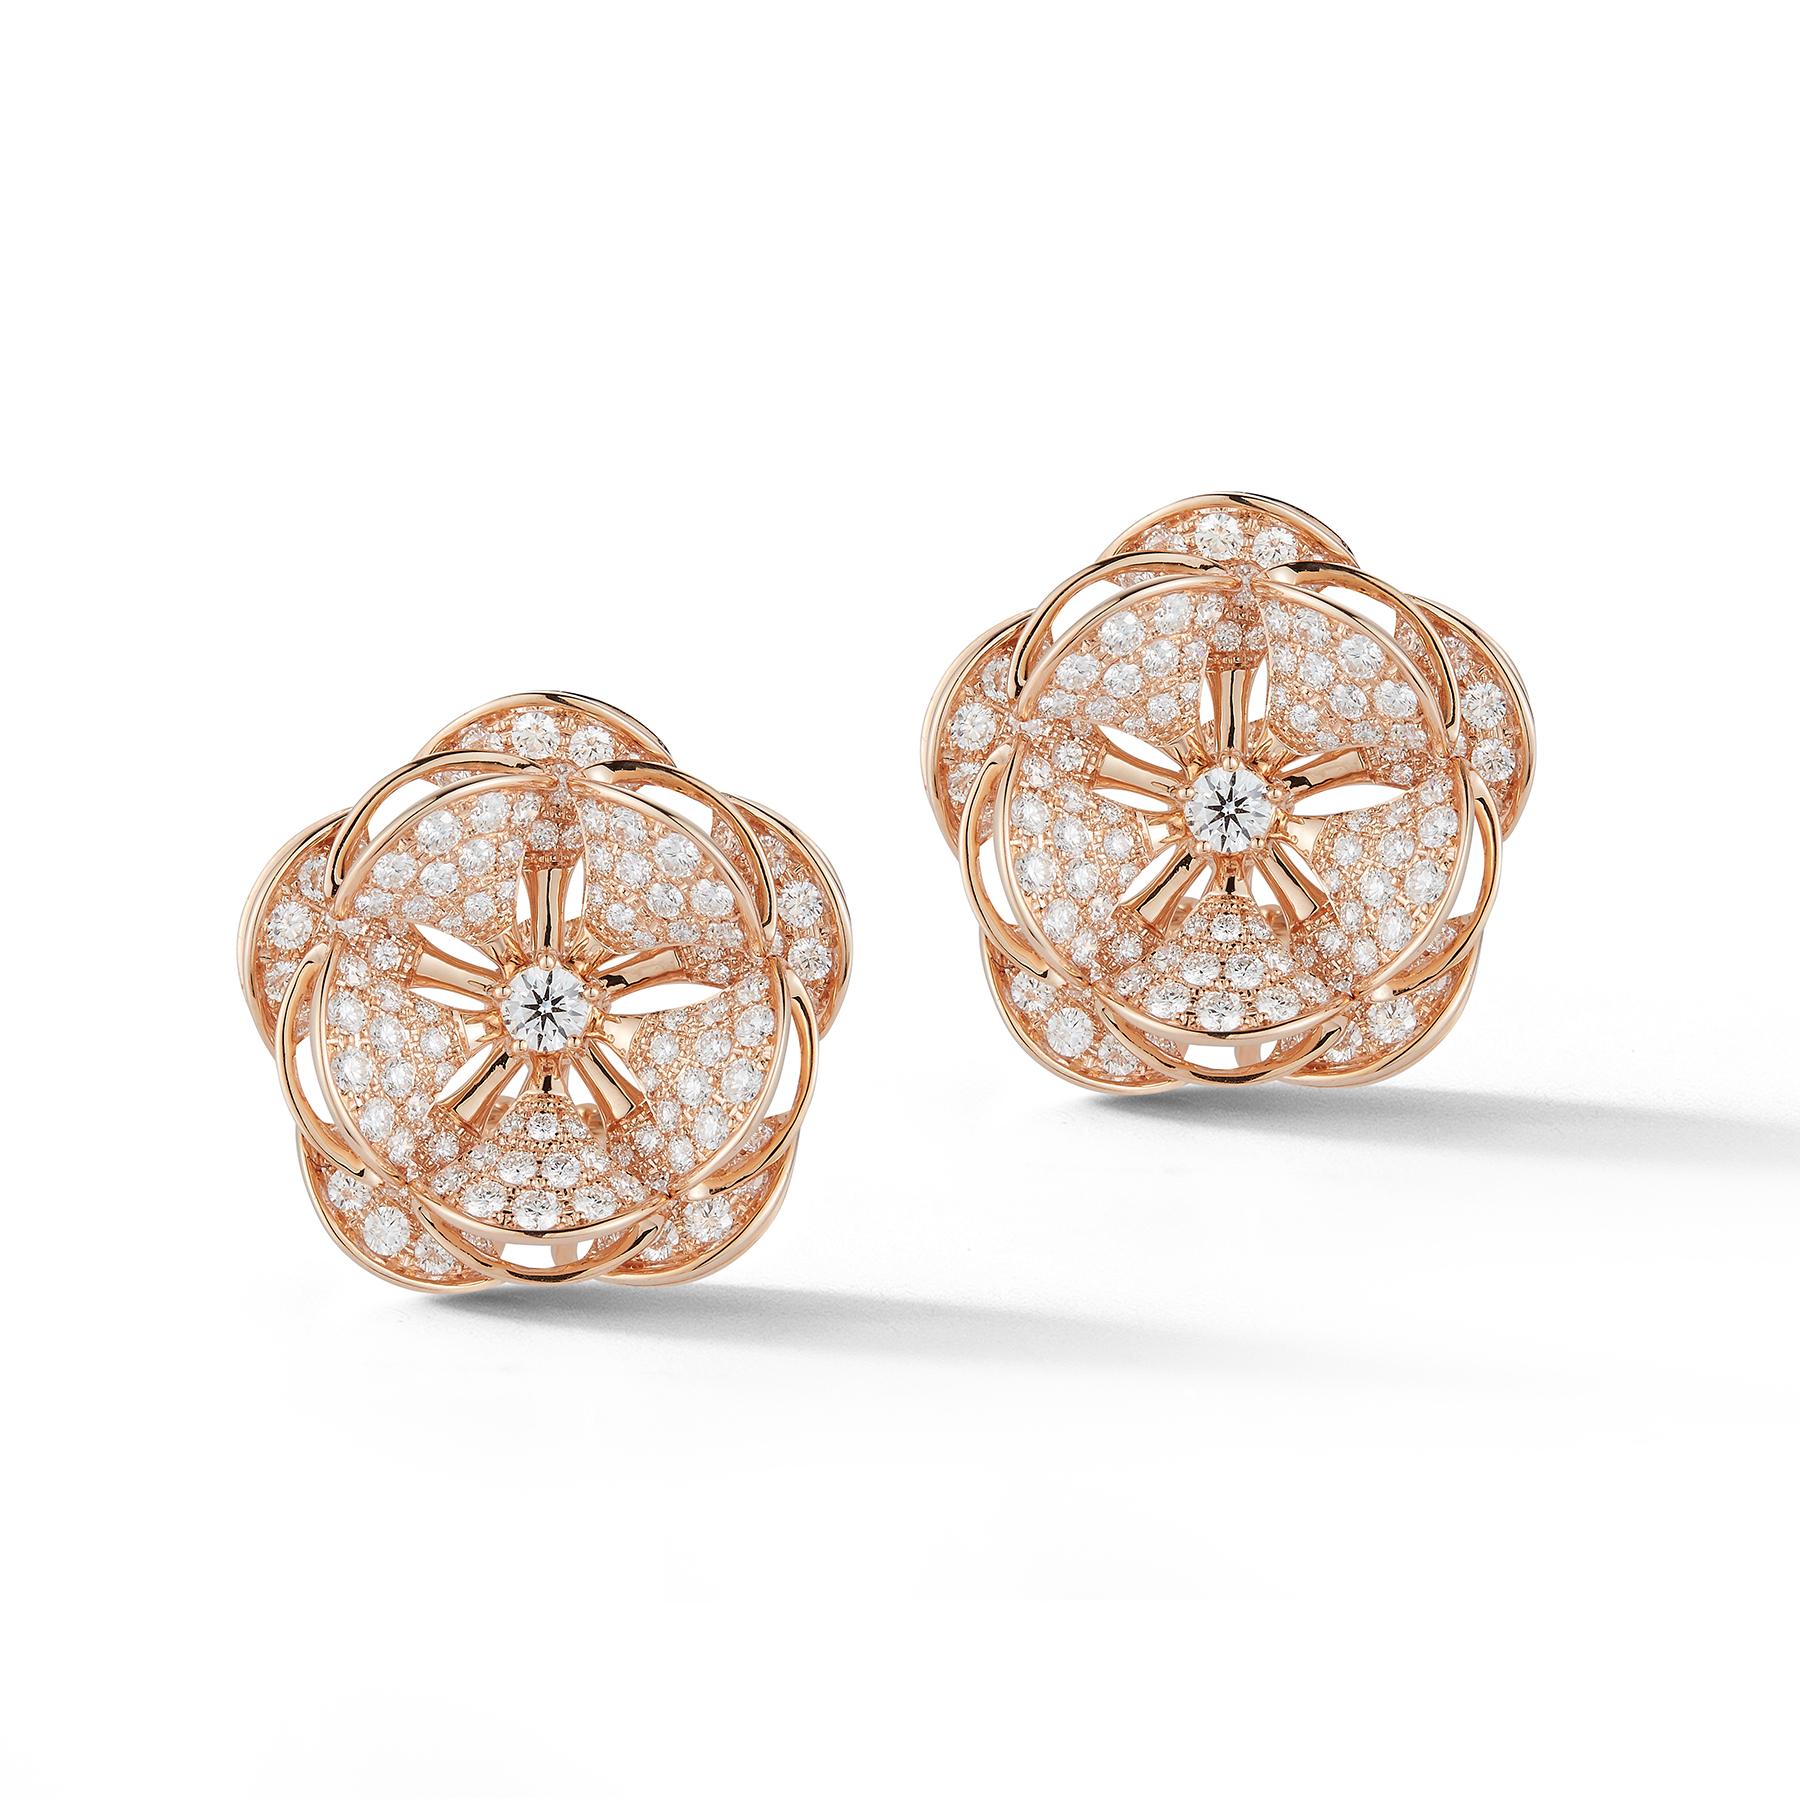 Gorgeous 18K Pink Gold Flower-Shaped Statement Earrings with 242 Flawless Diamonds weighing 4.57 Carats.